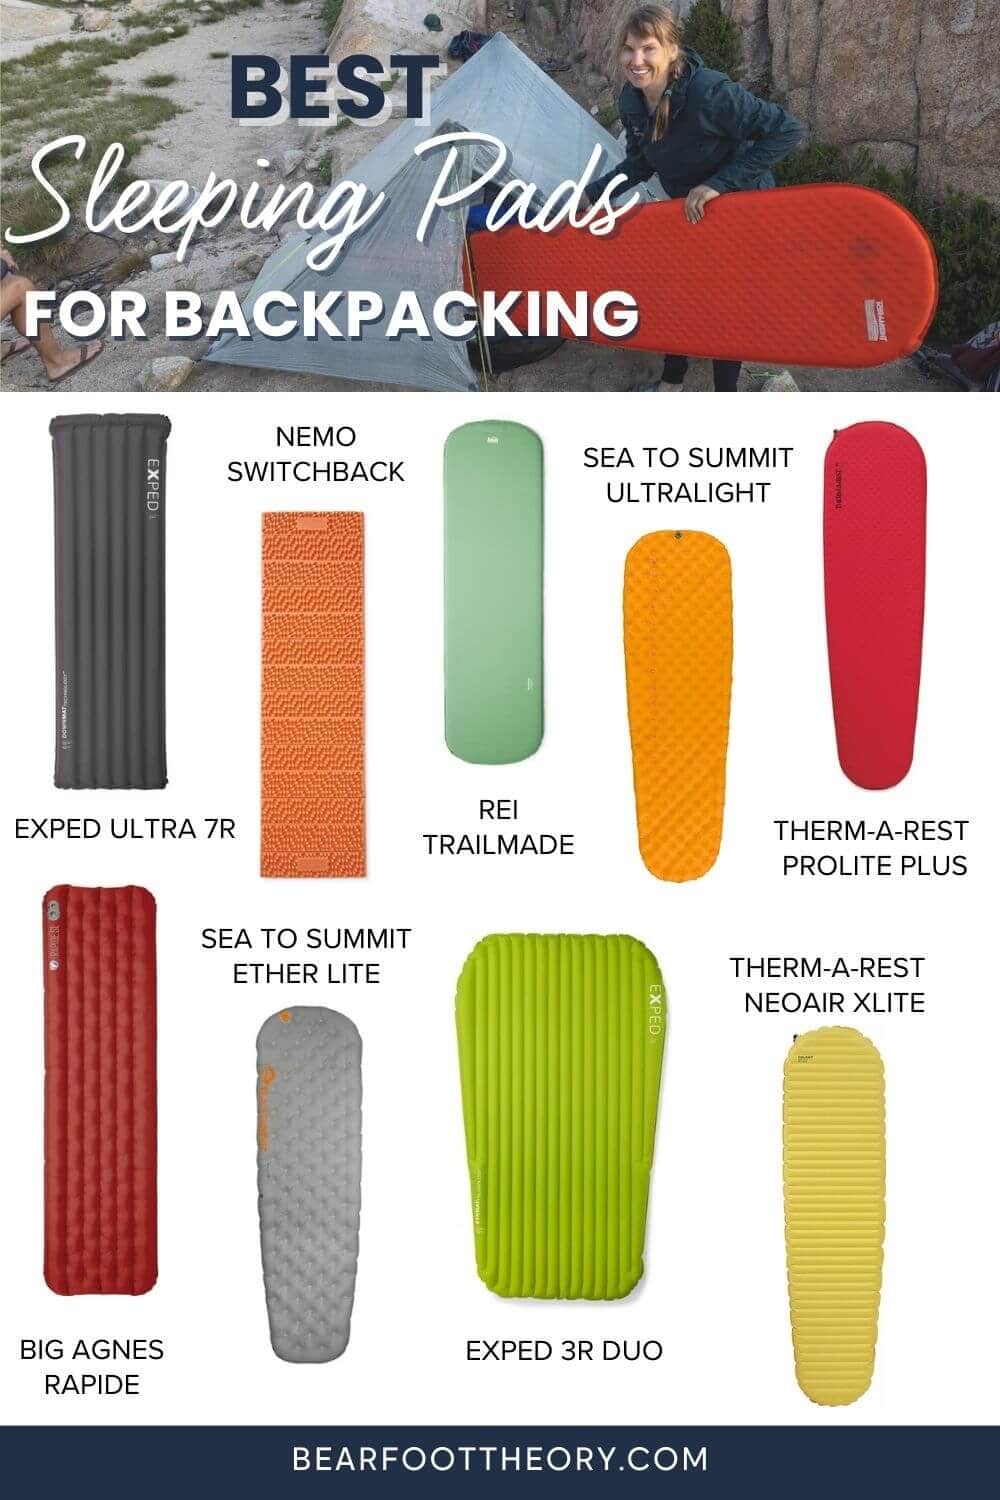 Bearfoot Theory | Get a good night's sleep on your next backpacking adventure with our top picks for the best sleeping pads! This blog post features the most comfortable, lightweight, and durable sleeping pads for backpacking as well as tips to help you choose the perfect one to keep you cozy on the trail. Don't sacrifice quality rest on the trail, check out our recommendations and wake up refreshed and ready to tackle any adventure!